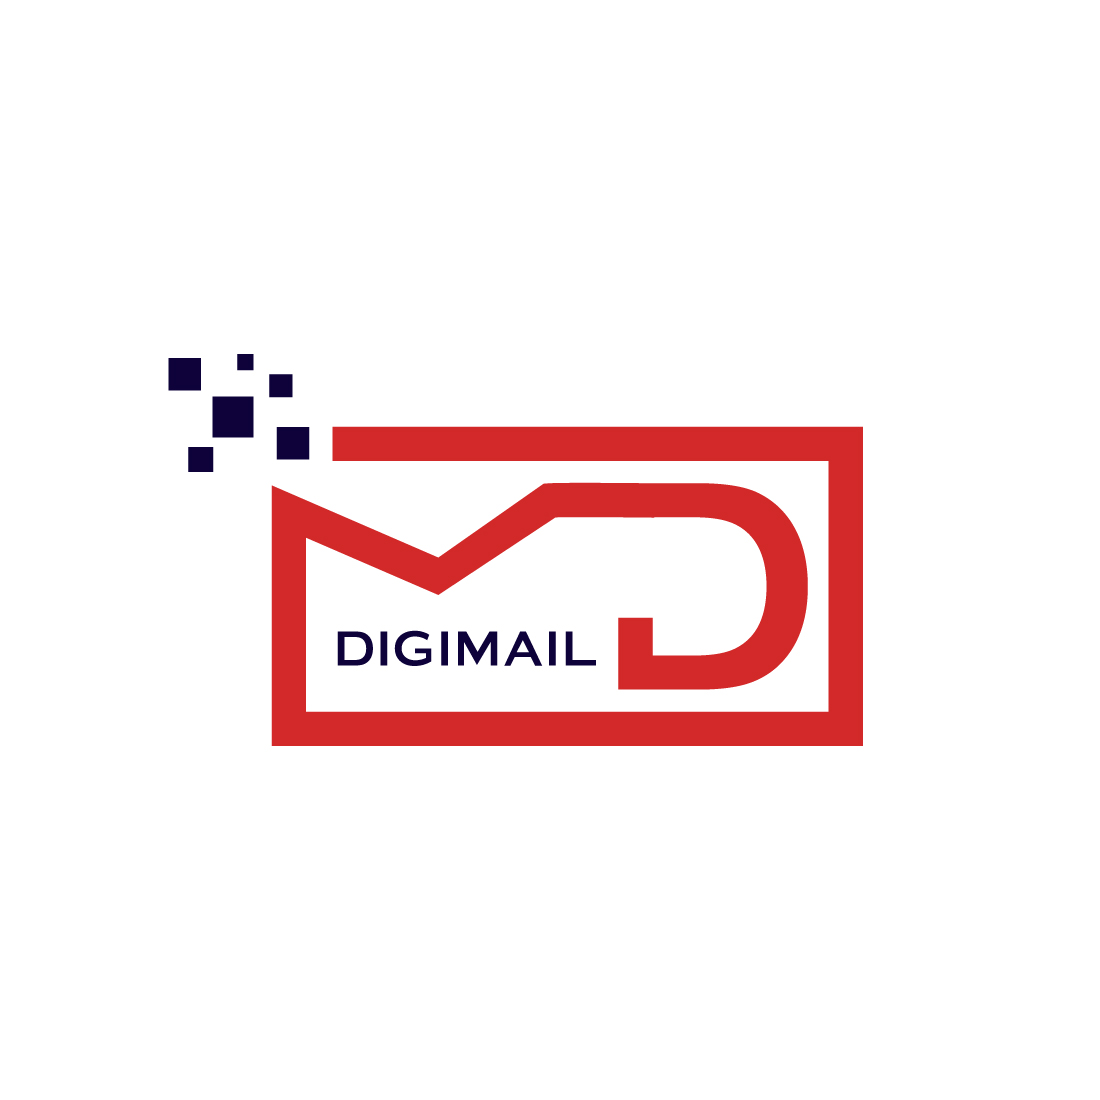 Digimail Red Logo Design Template cover image.